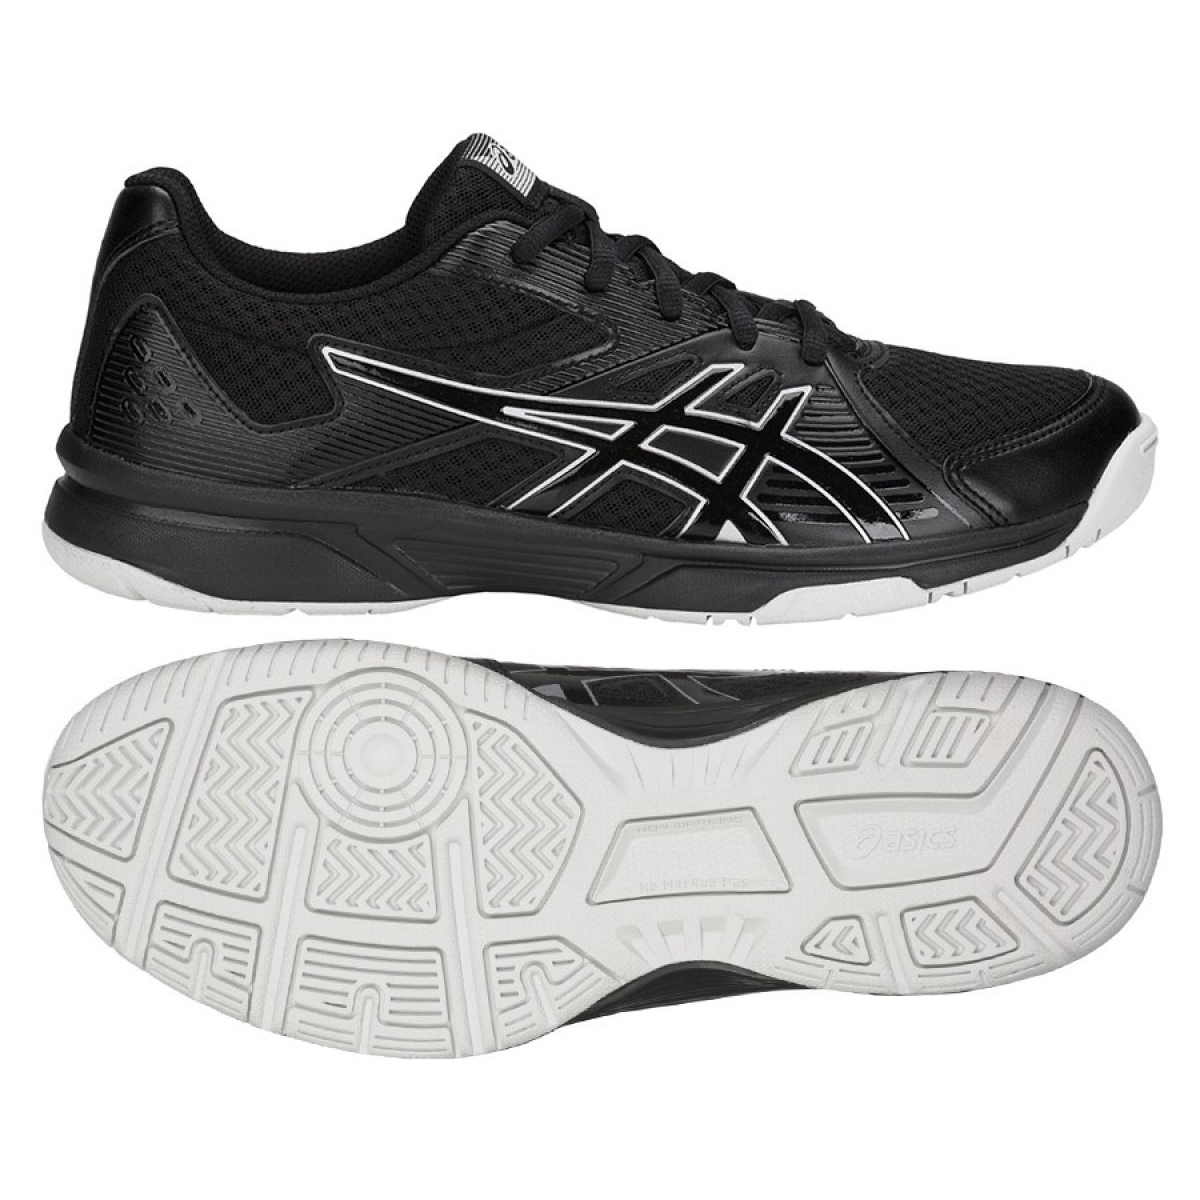 Huerta damnificados lb Asics Upcourt 3 M 1071A019-001 volleyball shoes black multicolored -  KeeShoes